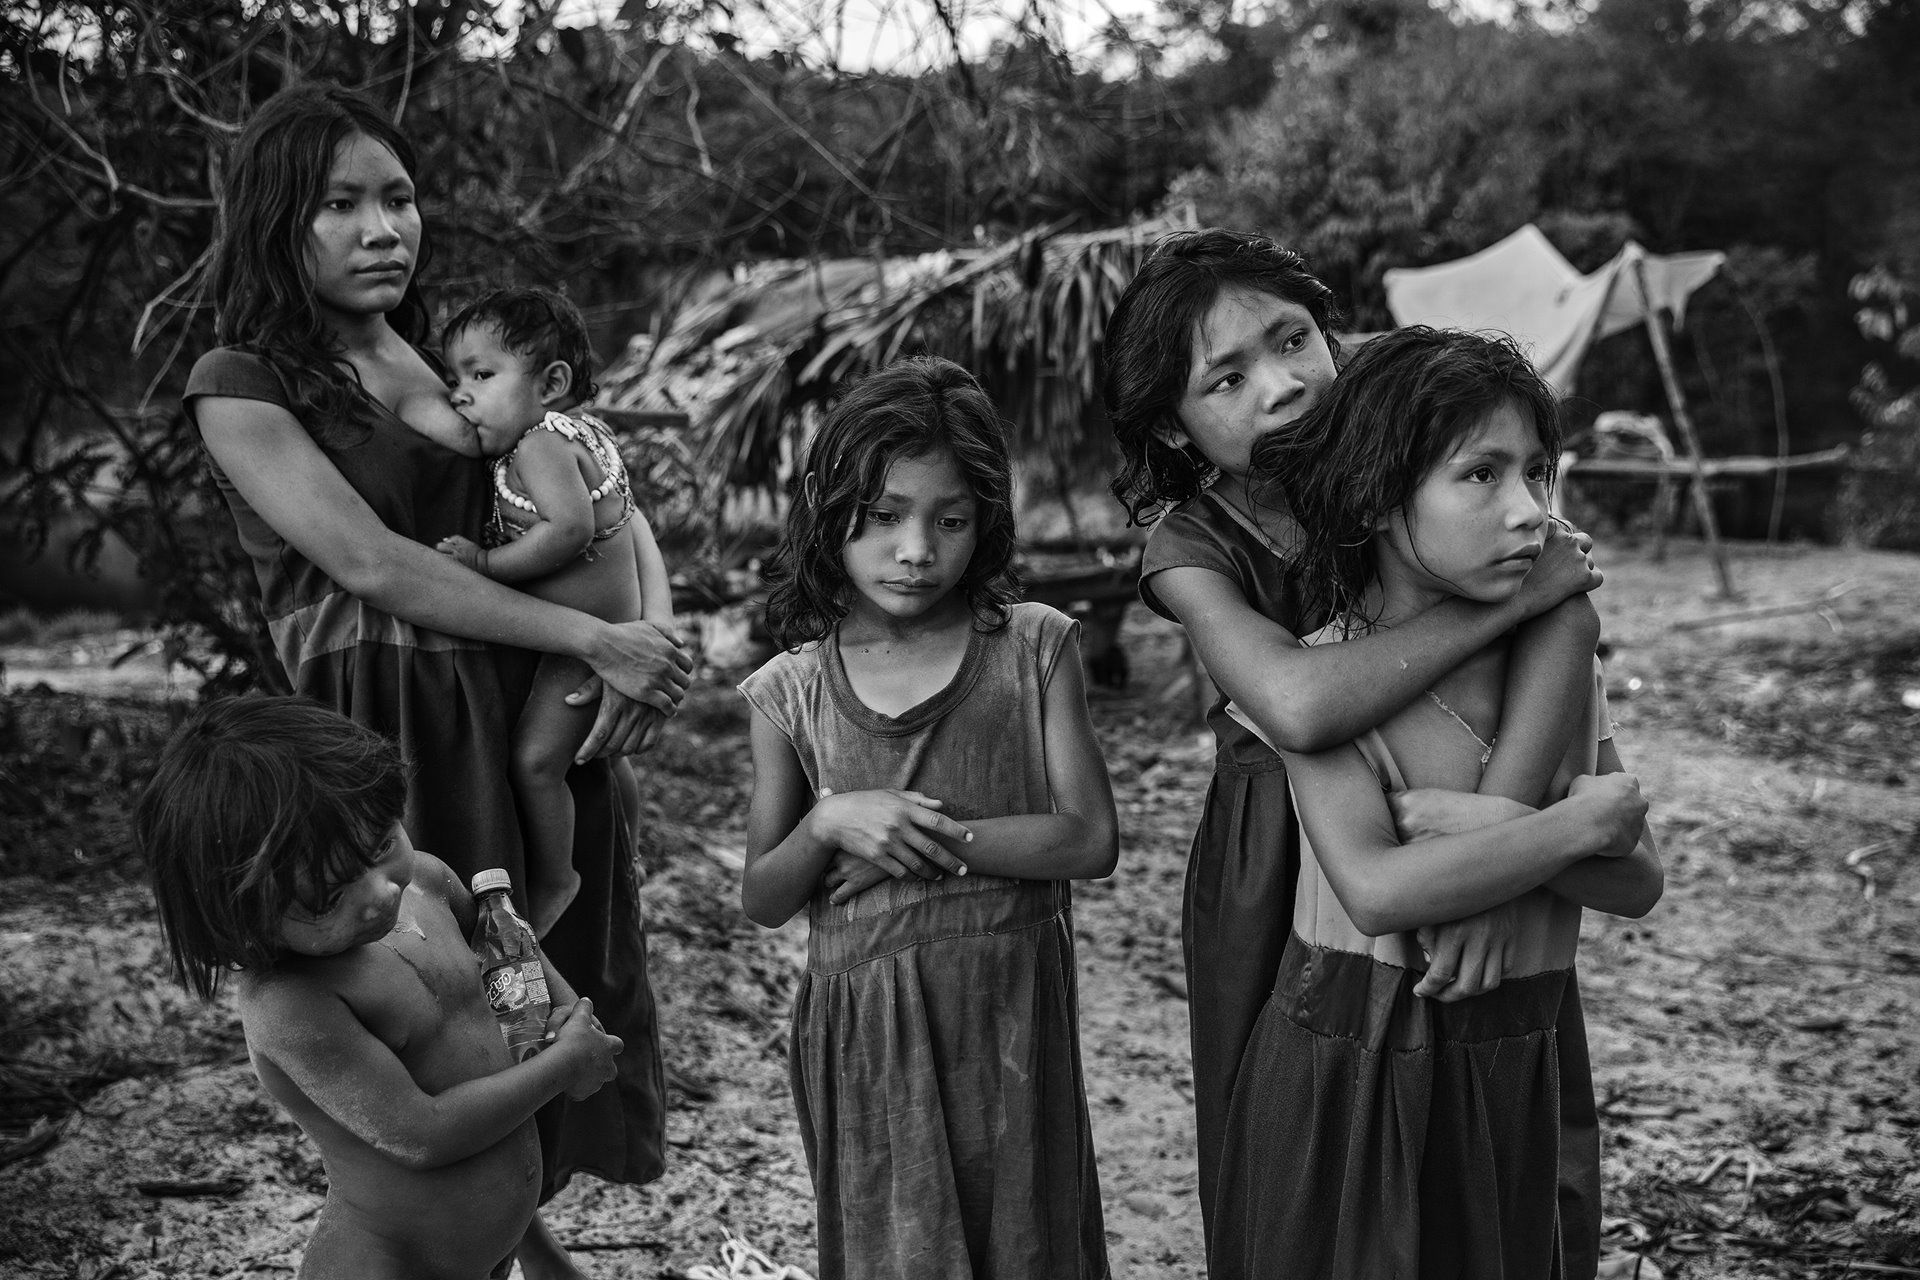 Women and children from the Pirahã community, standing next to their camp on the banks of the Maici River, watch drivers passing by on the Trans-Amazonian highway hoping to be given snacks or soft drinks, Humaitá, Amazon, Brazil.